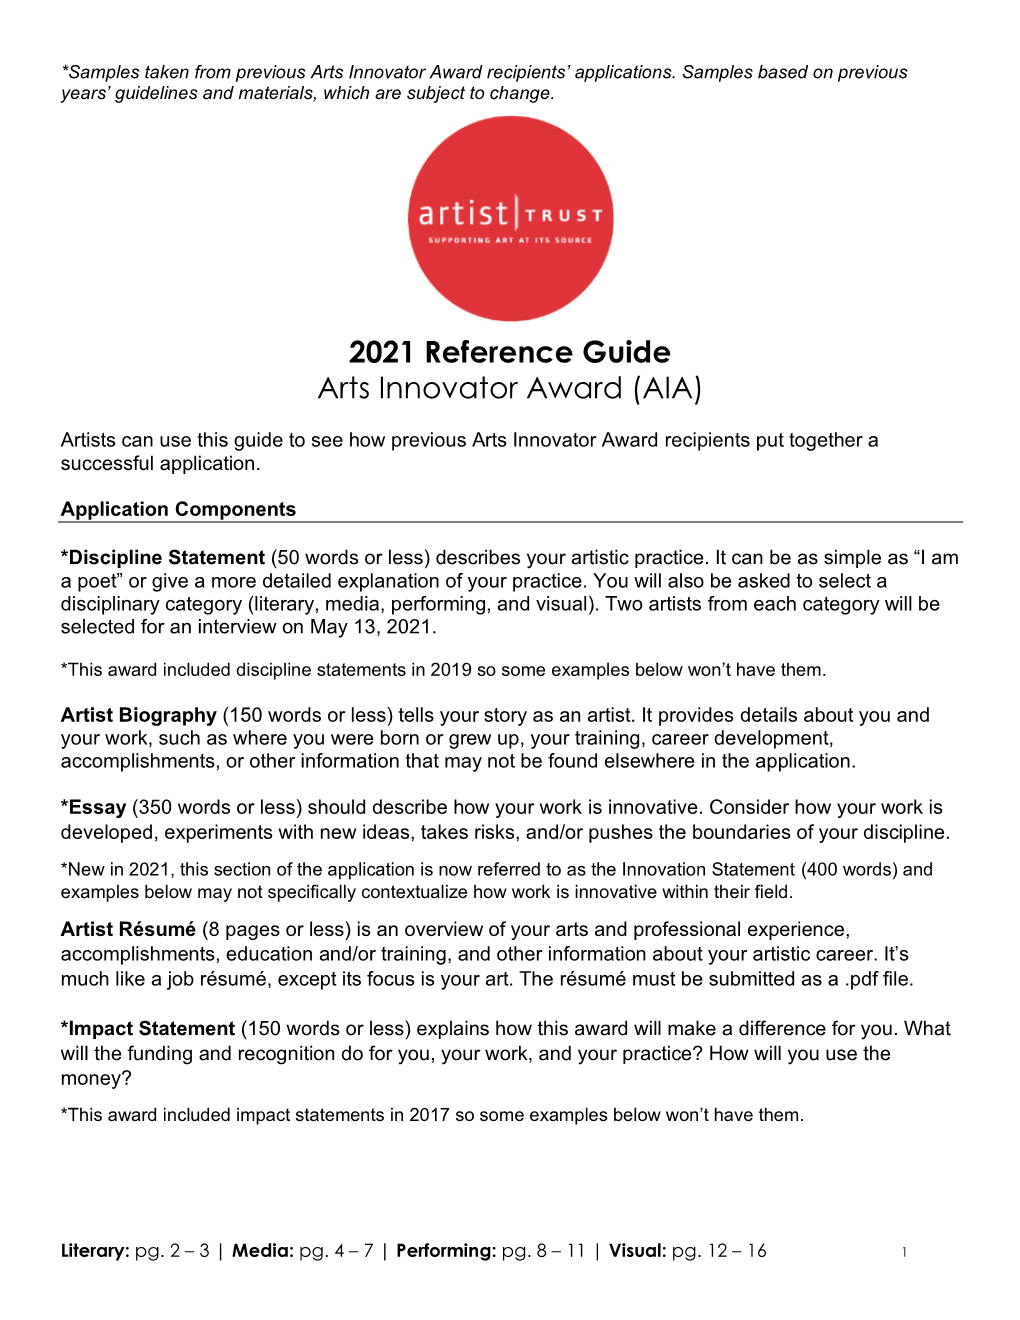 2021 Reference Guide Arts Innovator Award (AIA)